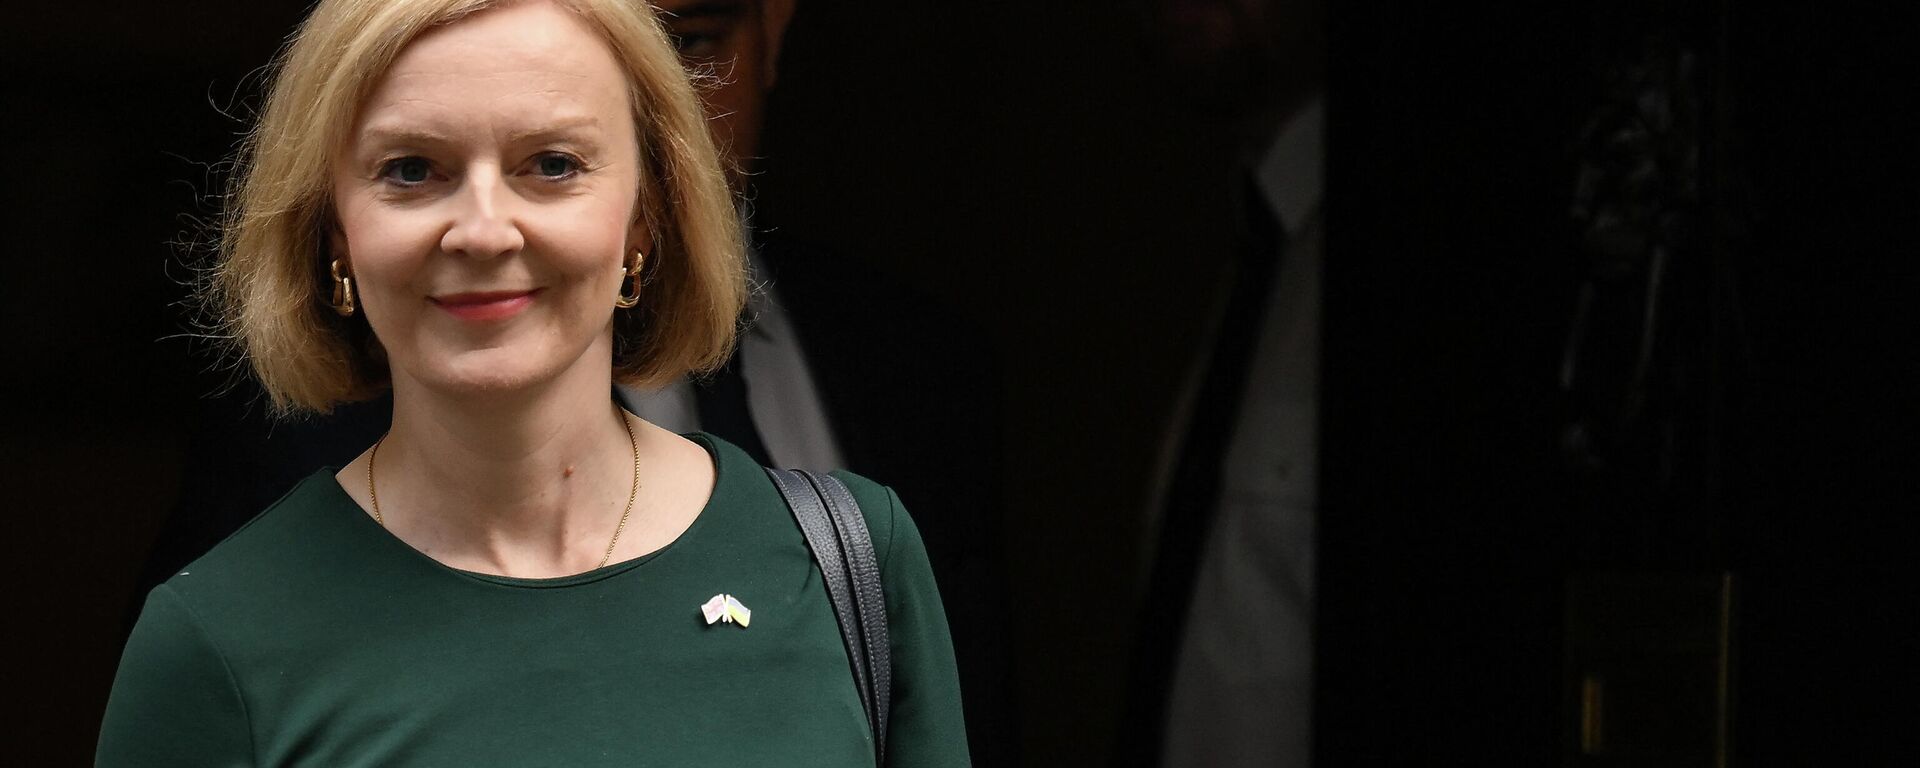 Britain's Prime Minister Liz Truss leaves the 10 Downing Street, in London, for the House of Commons to announce her energy price plan, on September 8, 2022 - Sputnik International, 1920, 05.10.2022